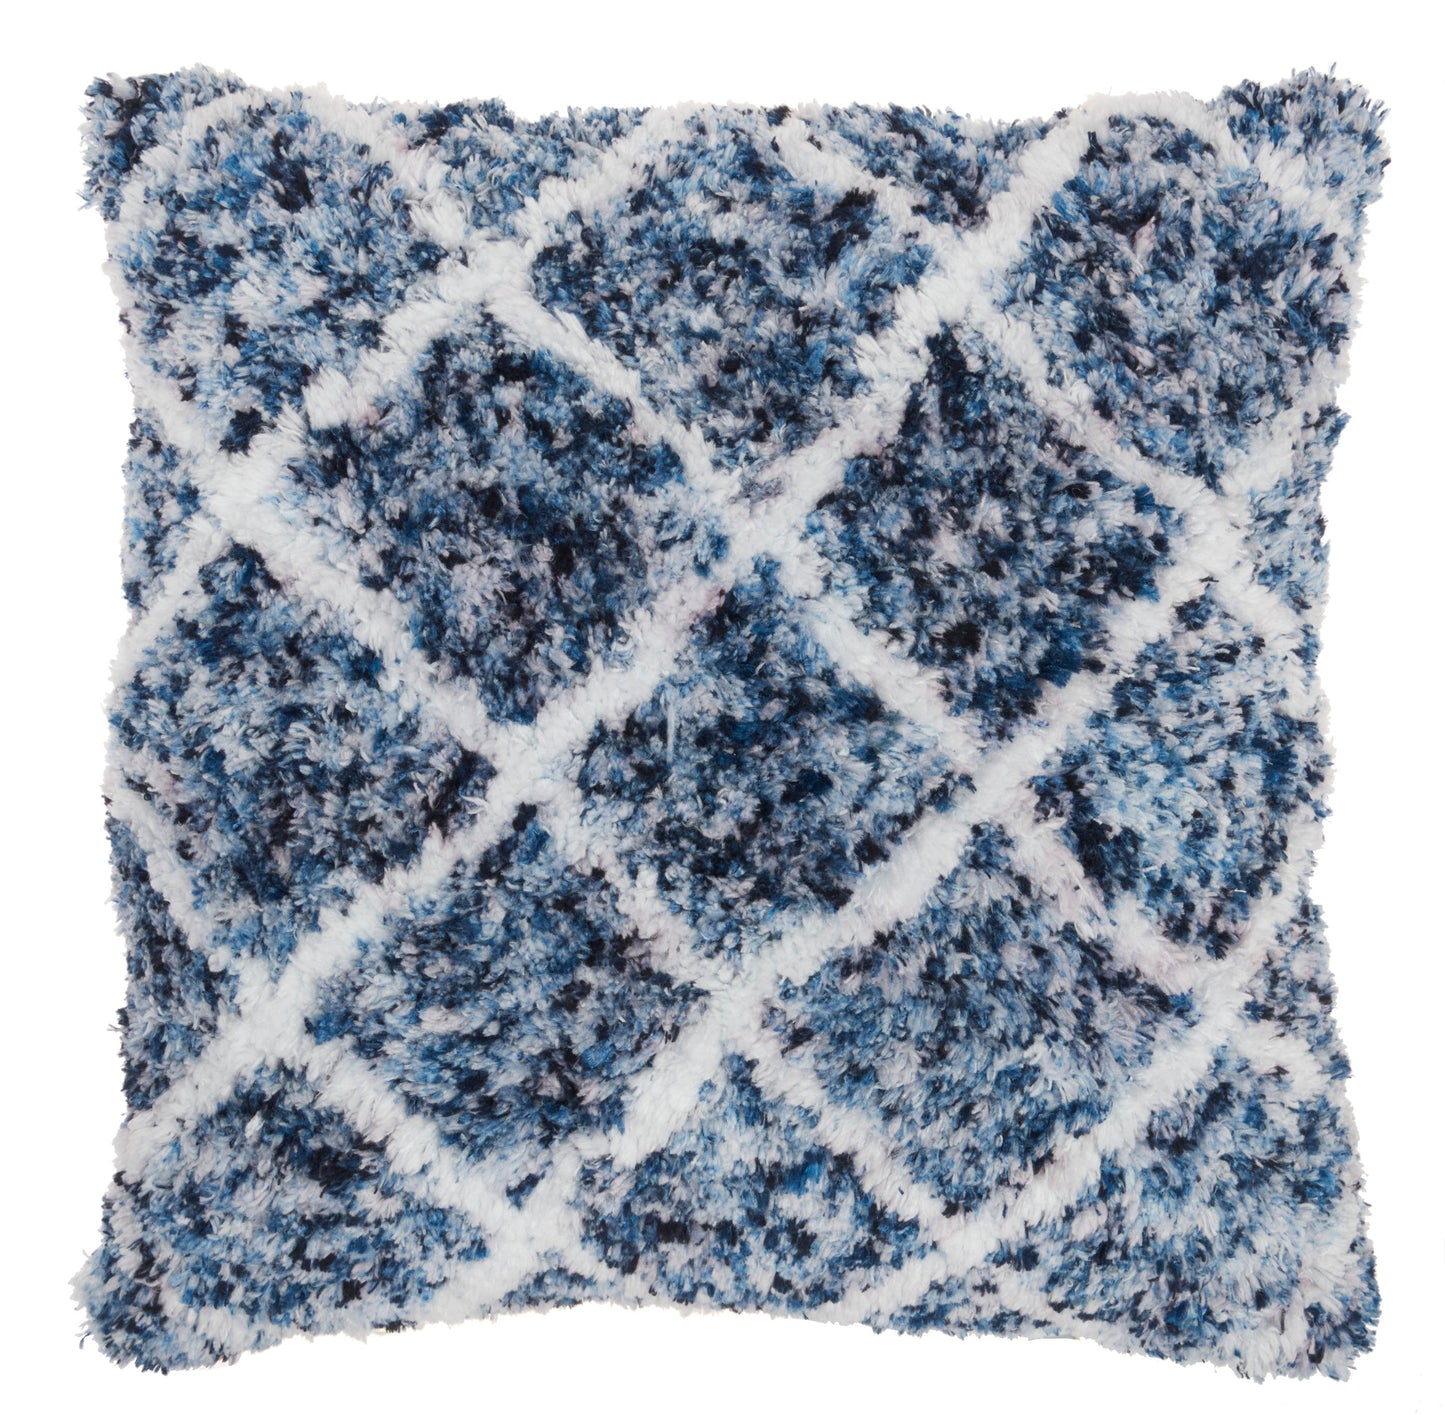 Life Styles DL902 Synthetic Blend Sprinkle Dye Lattice Throw Pillow From Mina Victory By Nourison Rugs